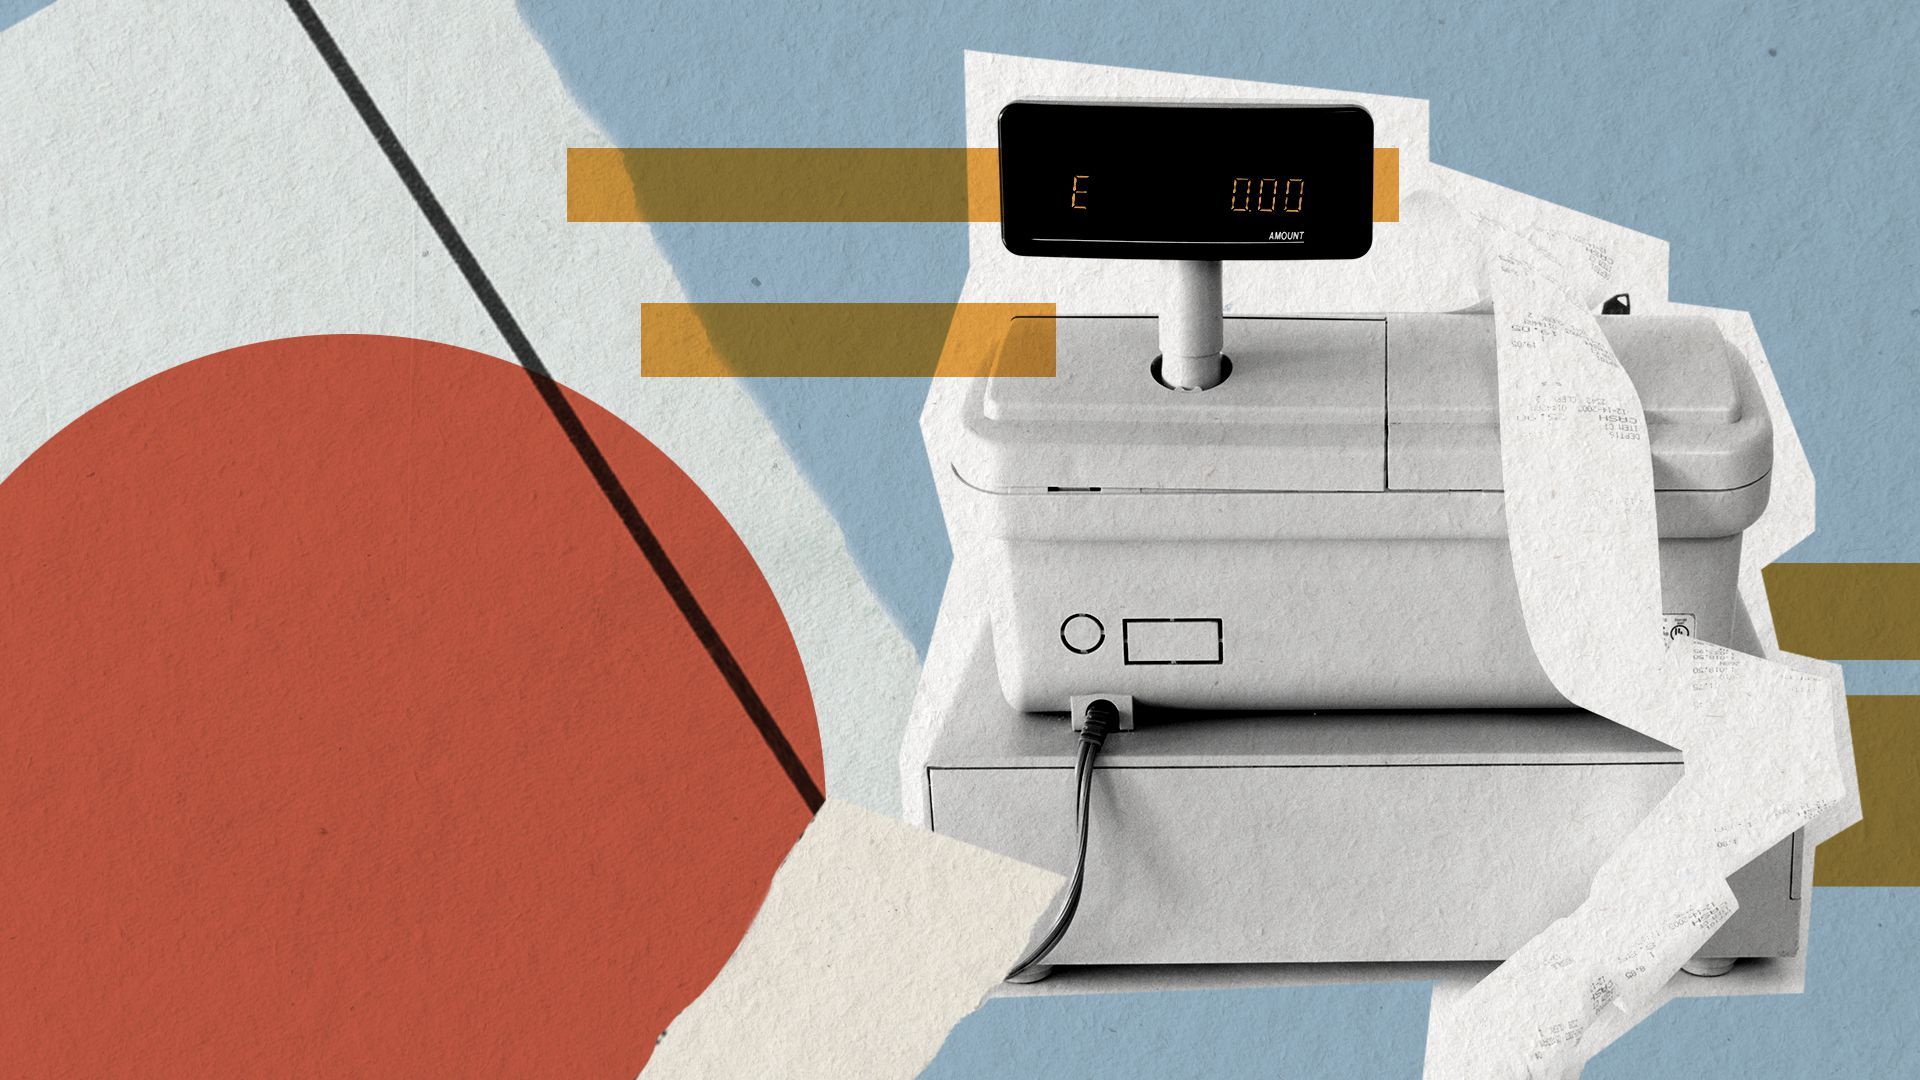 Illustration collage of a cash register among torn papers and colorful shapes 